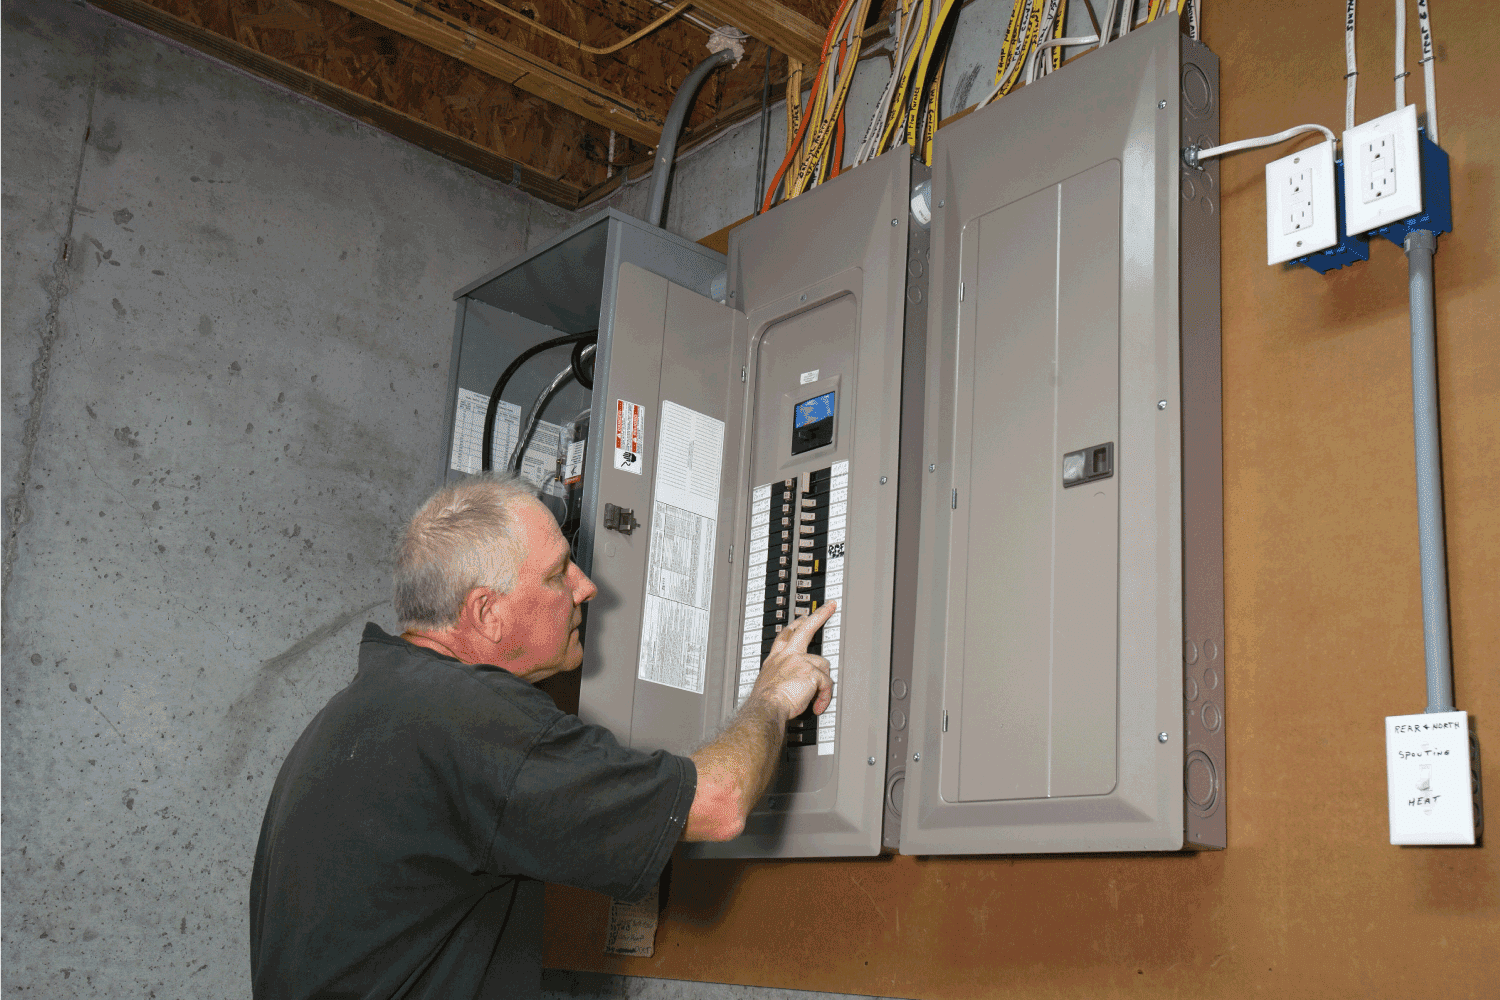 man checking the labels on his home fuse box